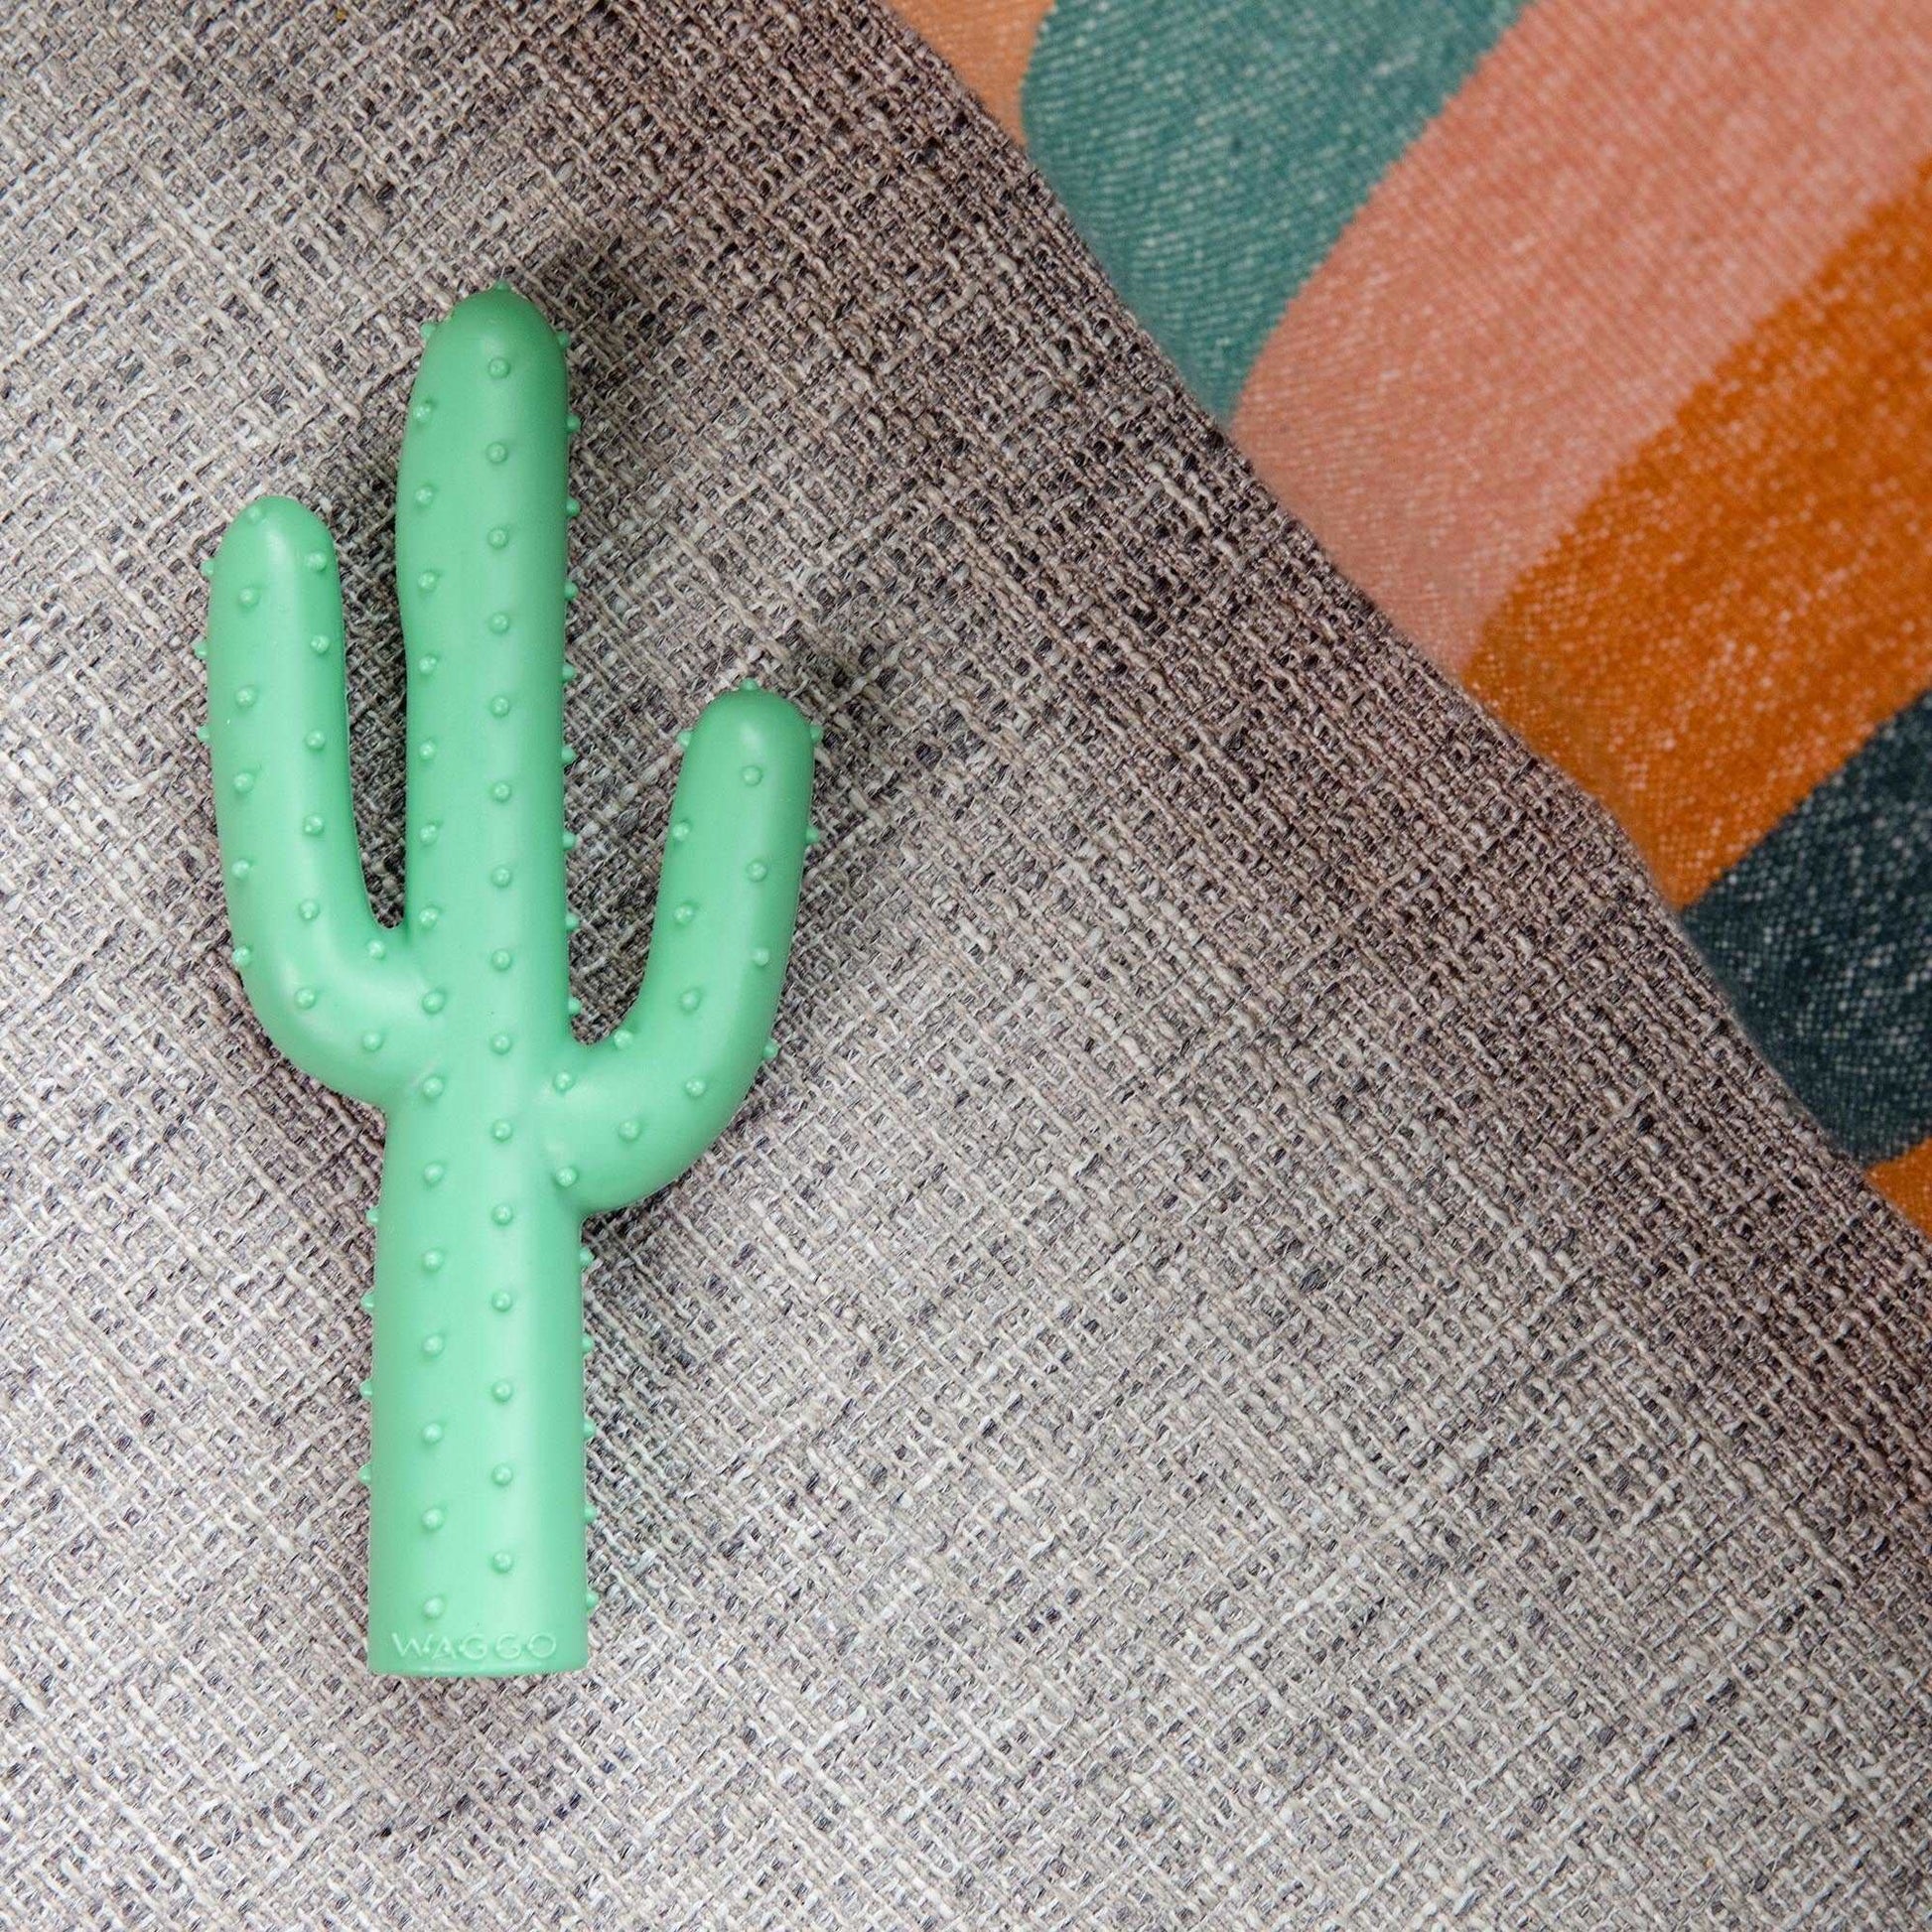 Silly Succulent Cactus rubber Dog chew Toy by Waggo on couch